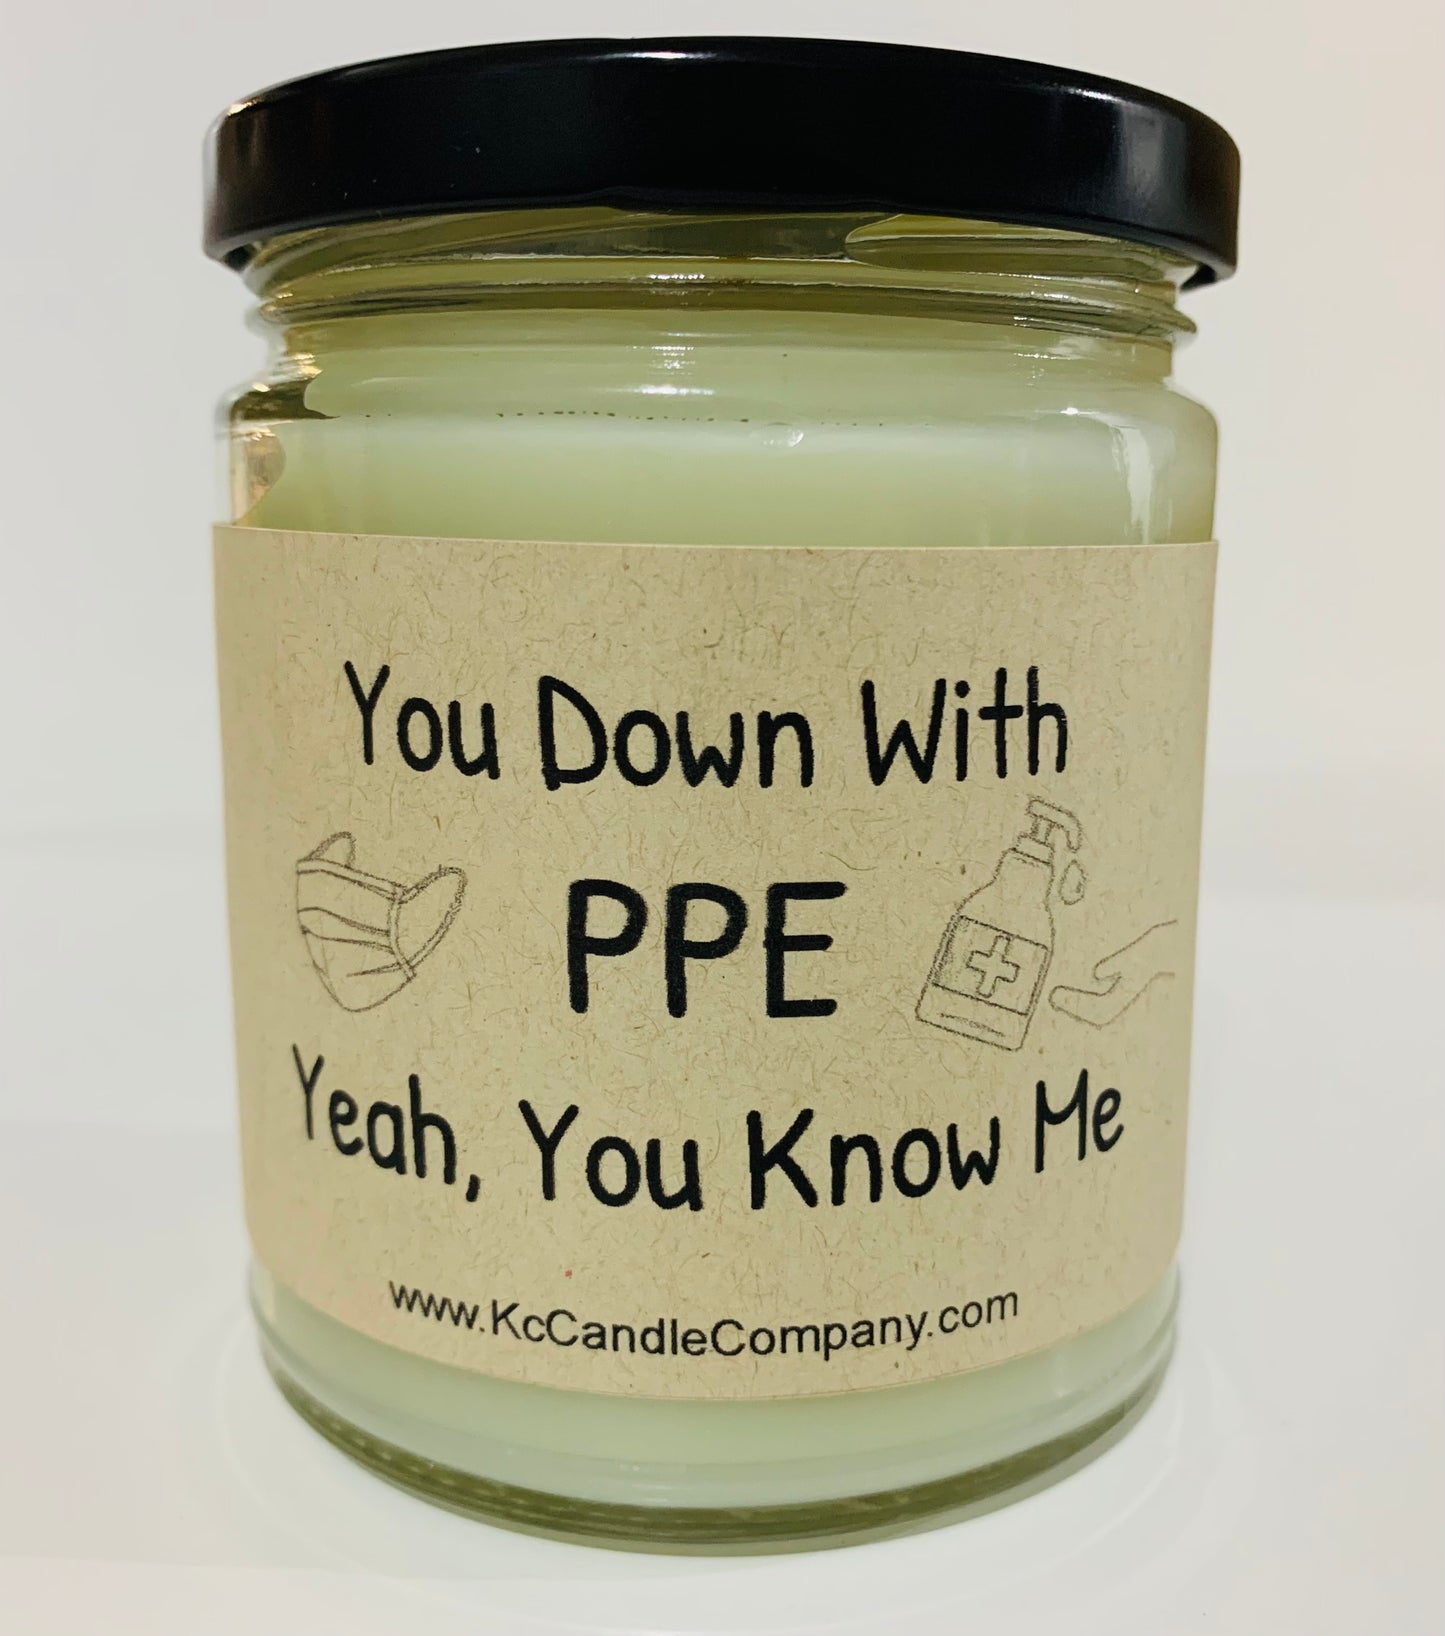 You Down with PPE - Yeah, You Know Me